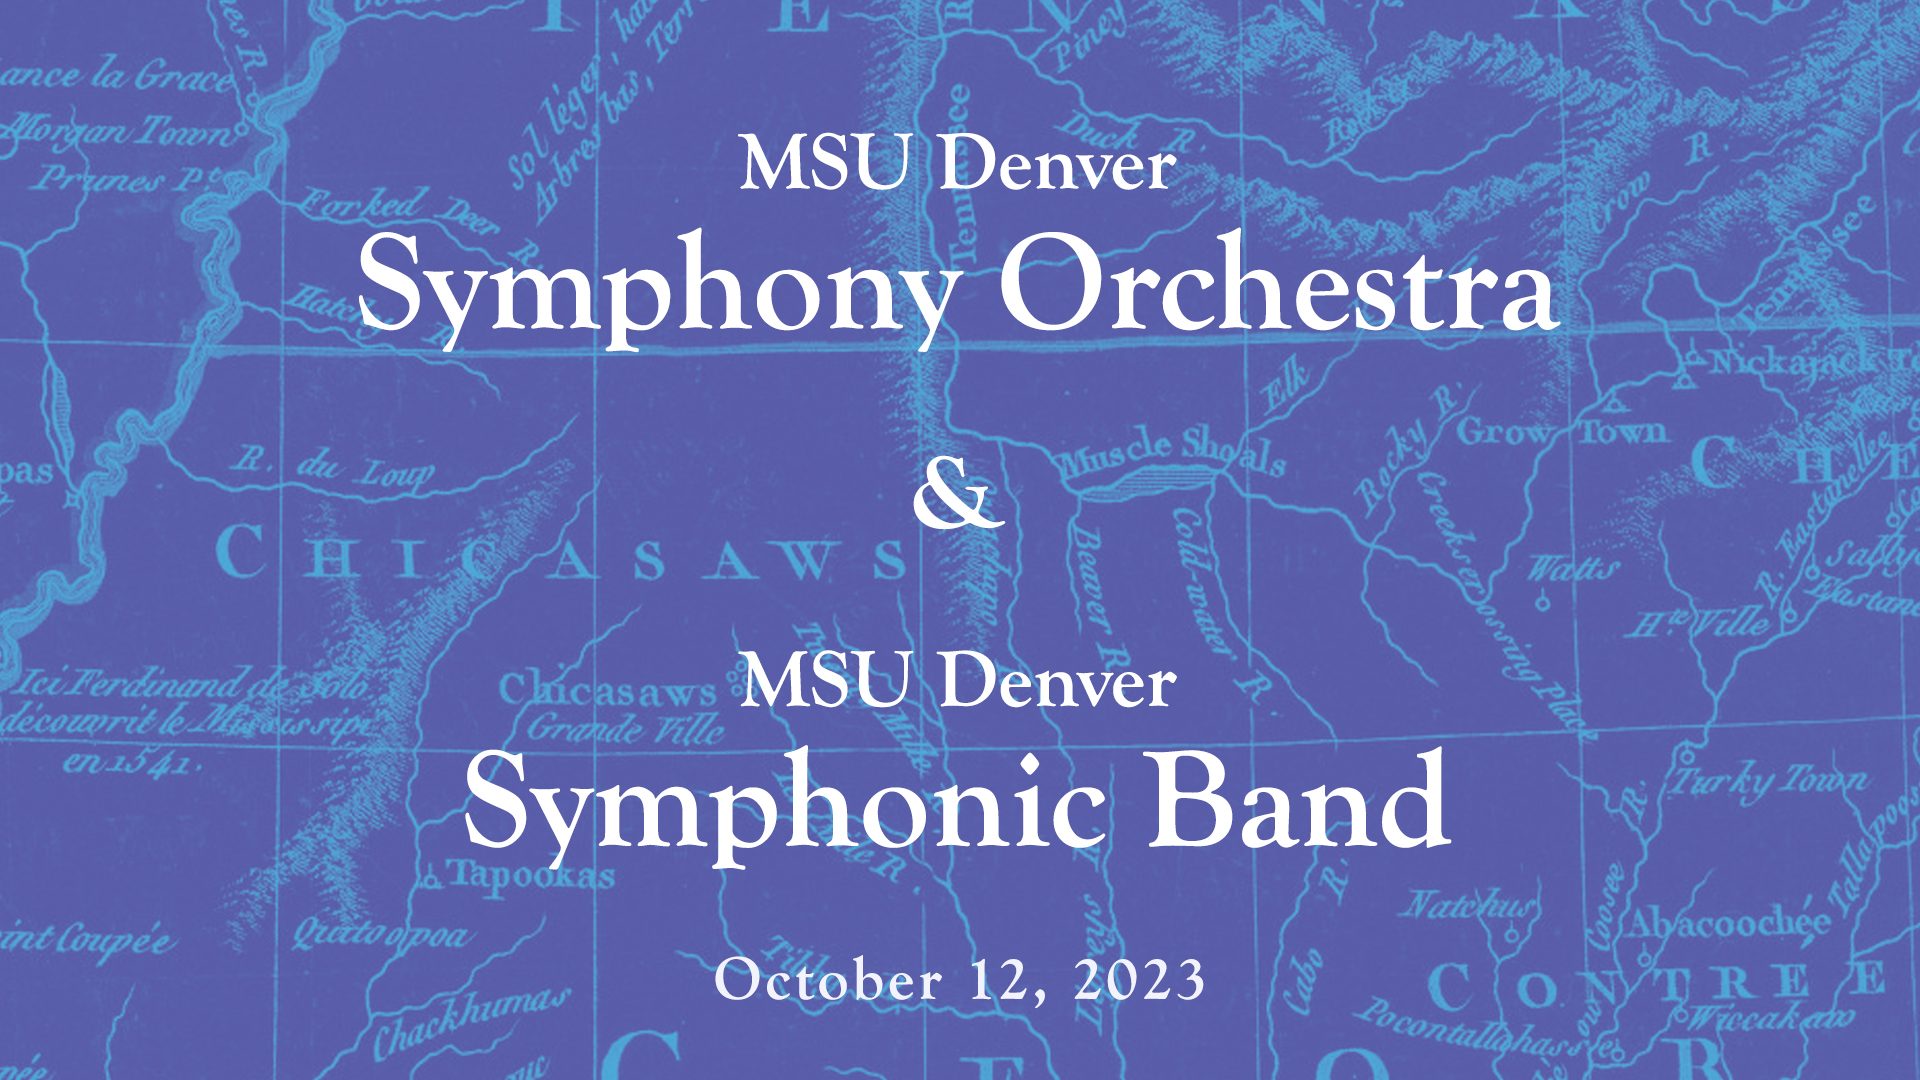 Symphony and Symphonic Band text against background of old map